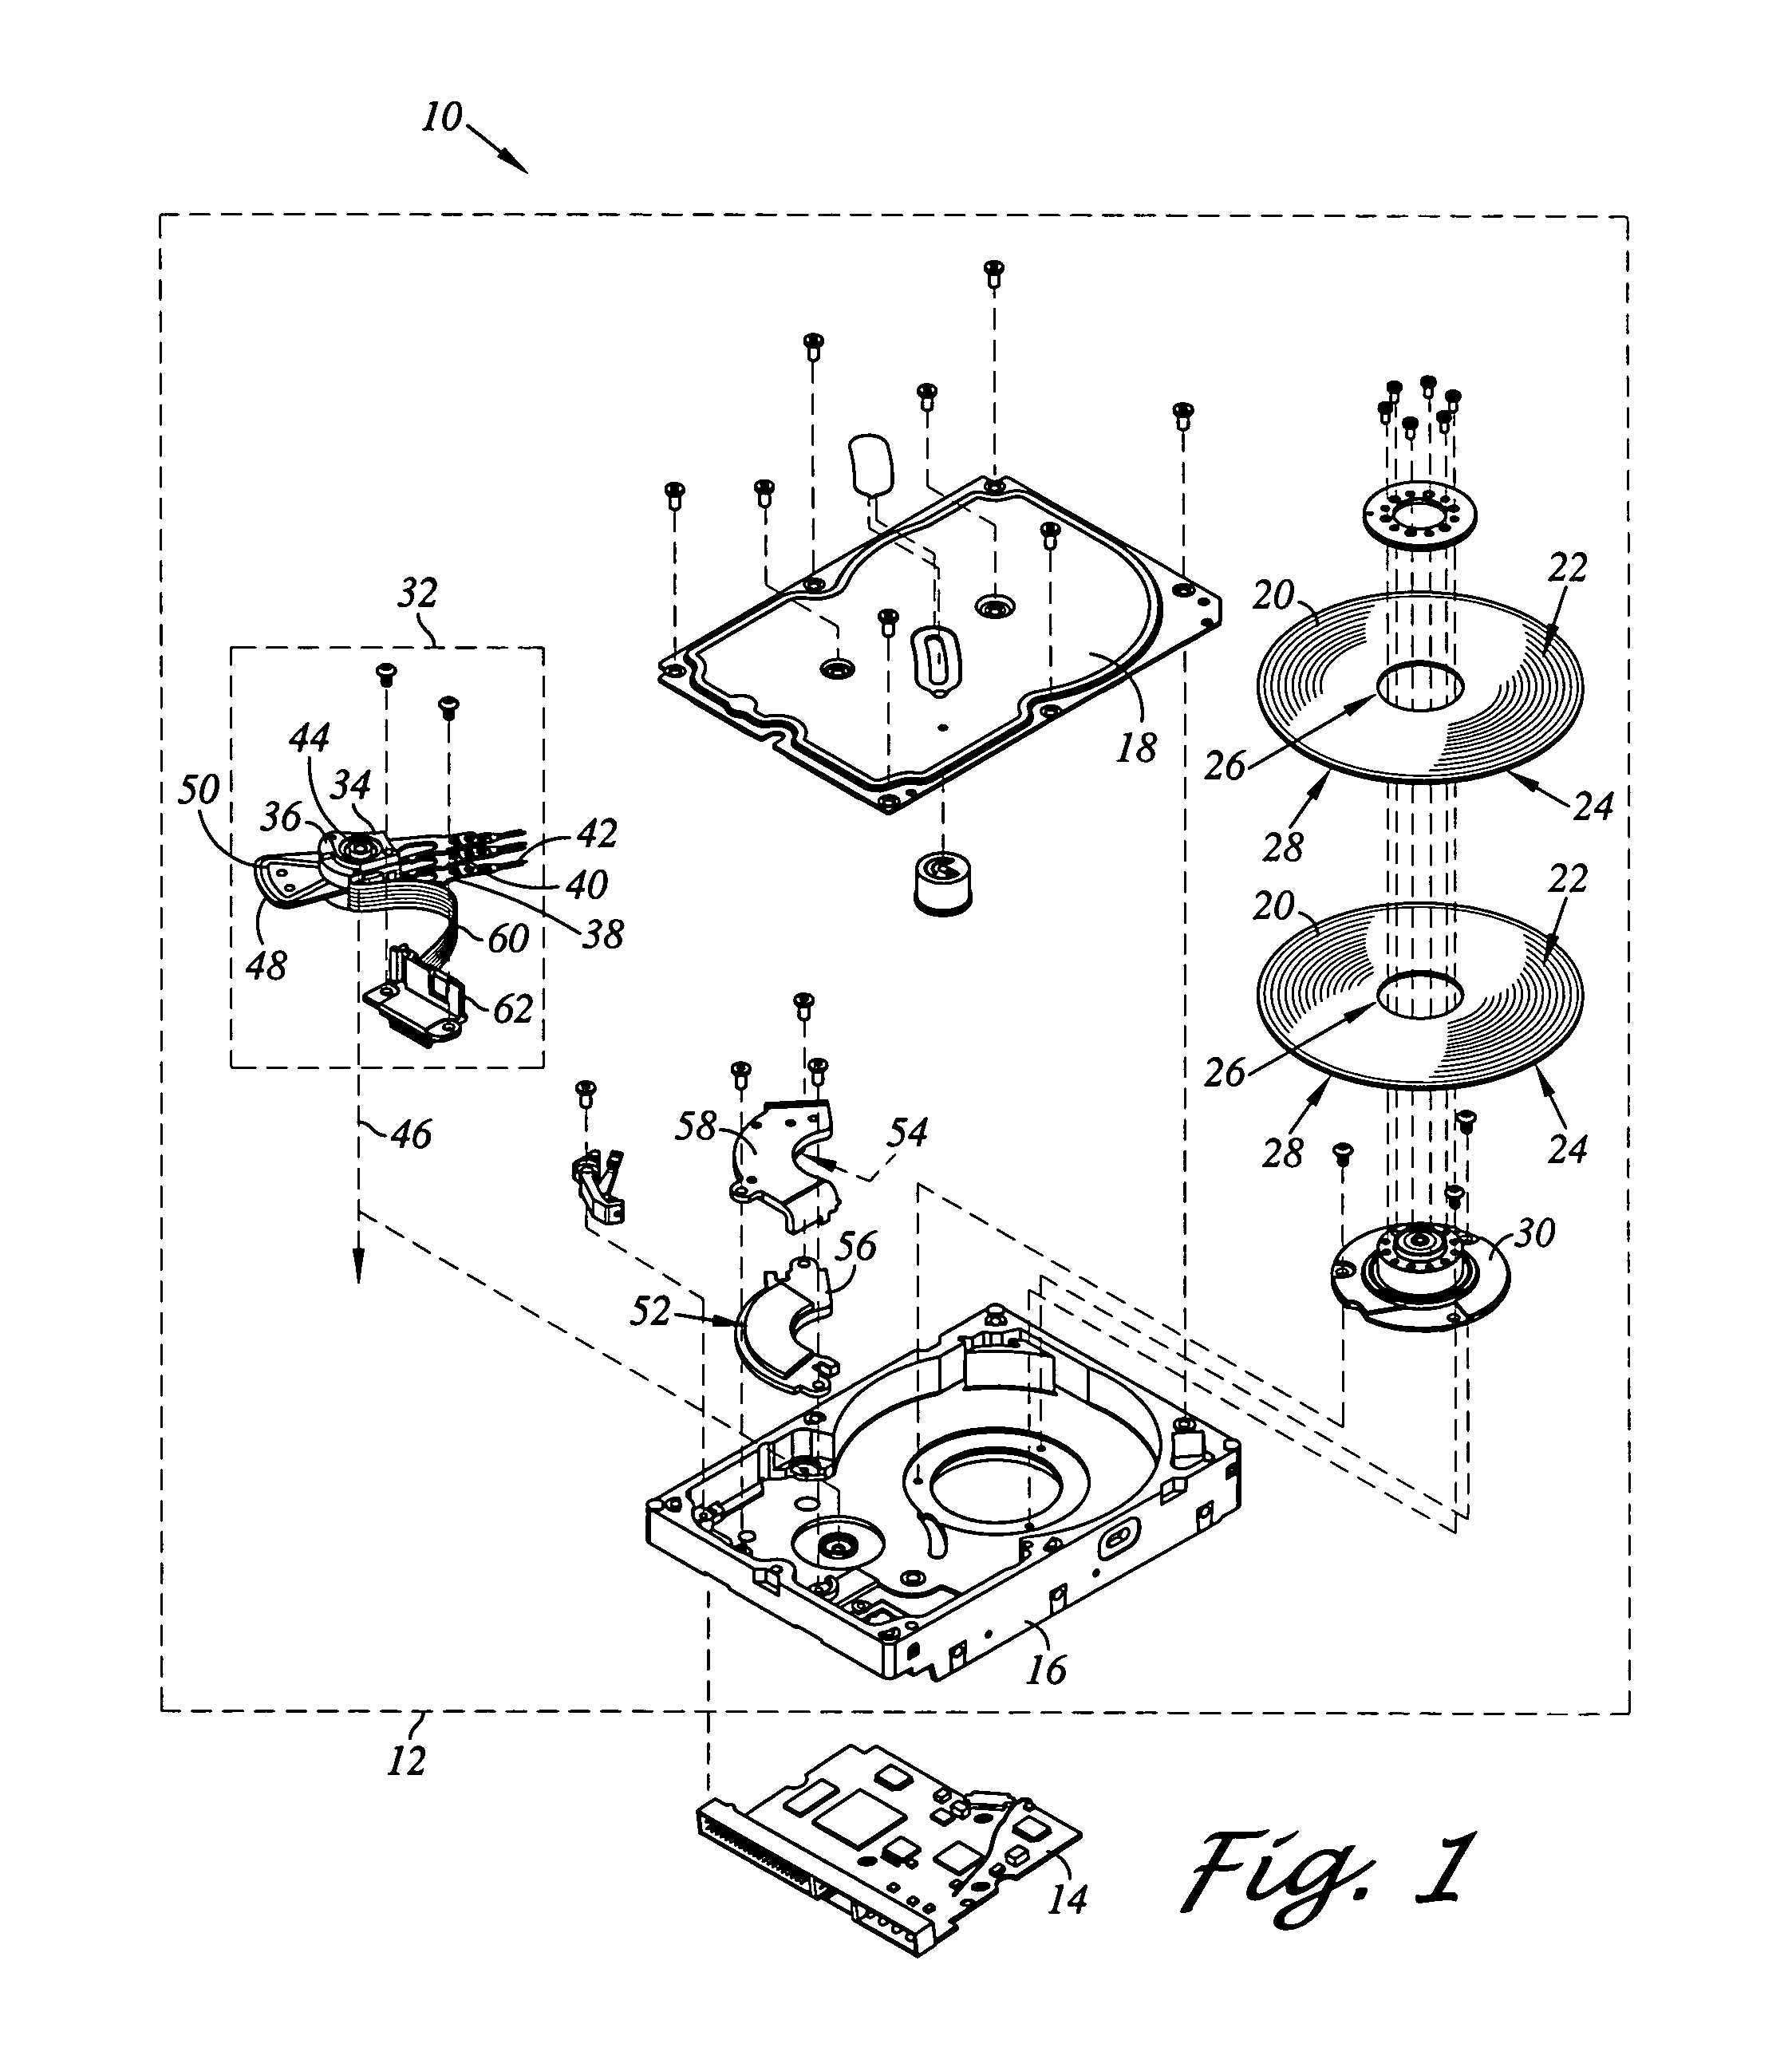 Head gimbal assembly including a trace suspension assembly backing layer with a conductive layer formed upon a gimbal having a lower oxidation rate